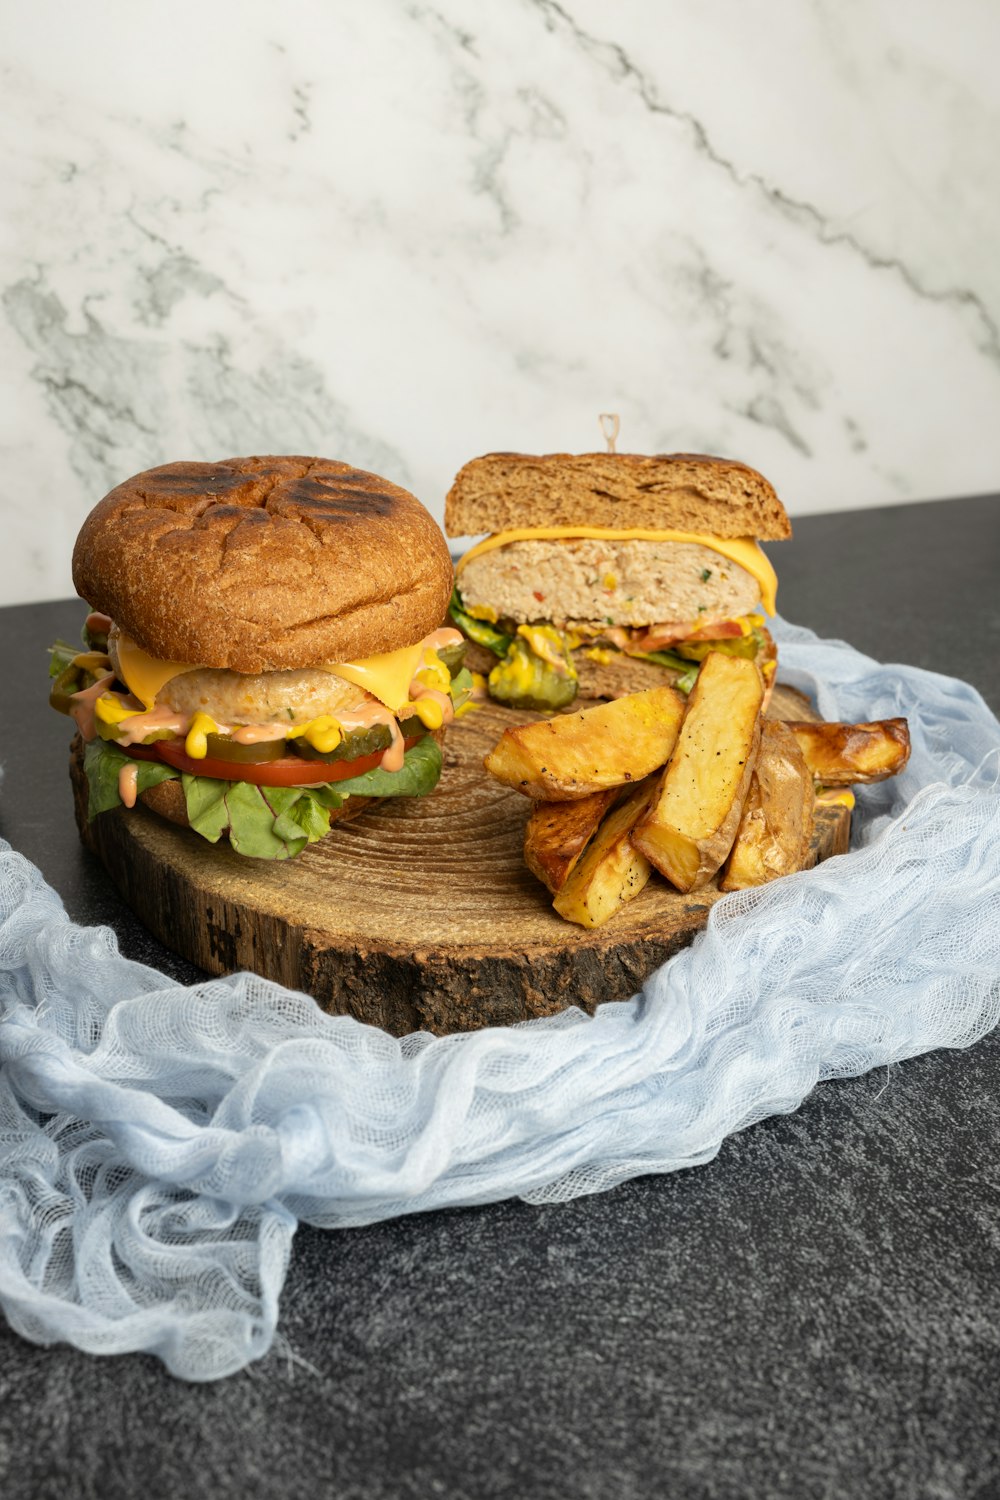 a sandwich and french fries on a wooden board